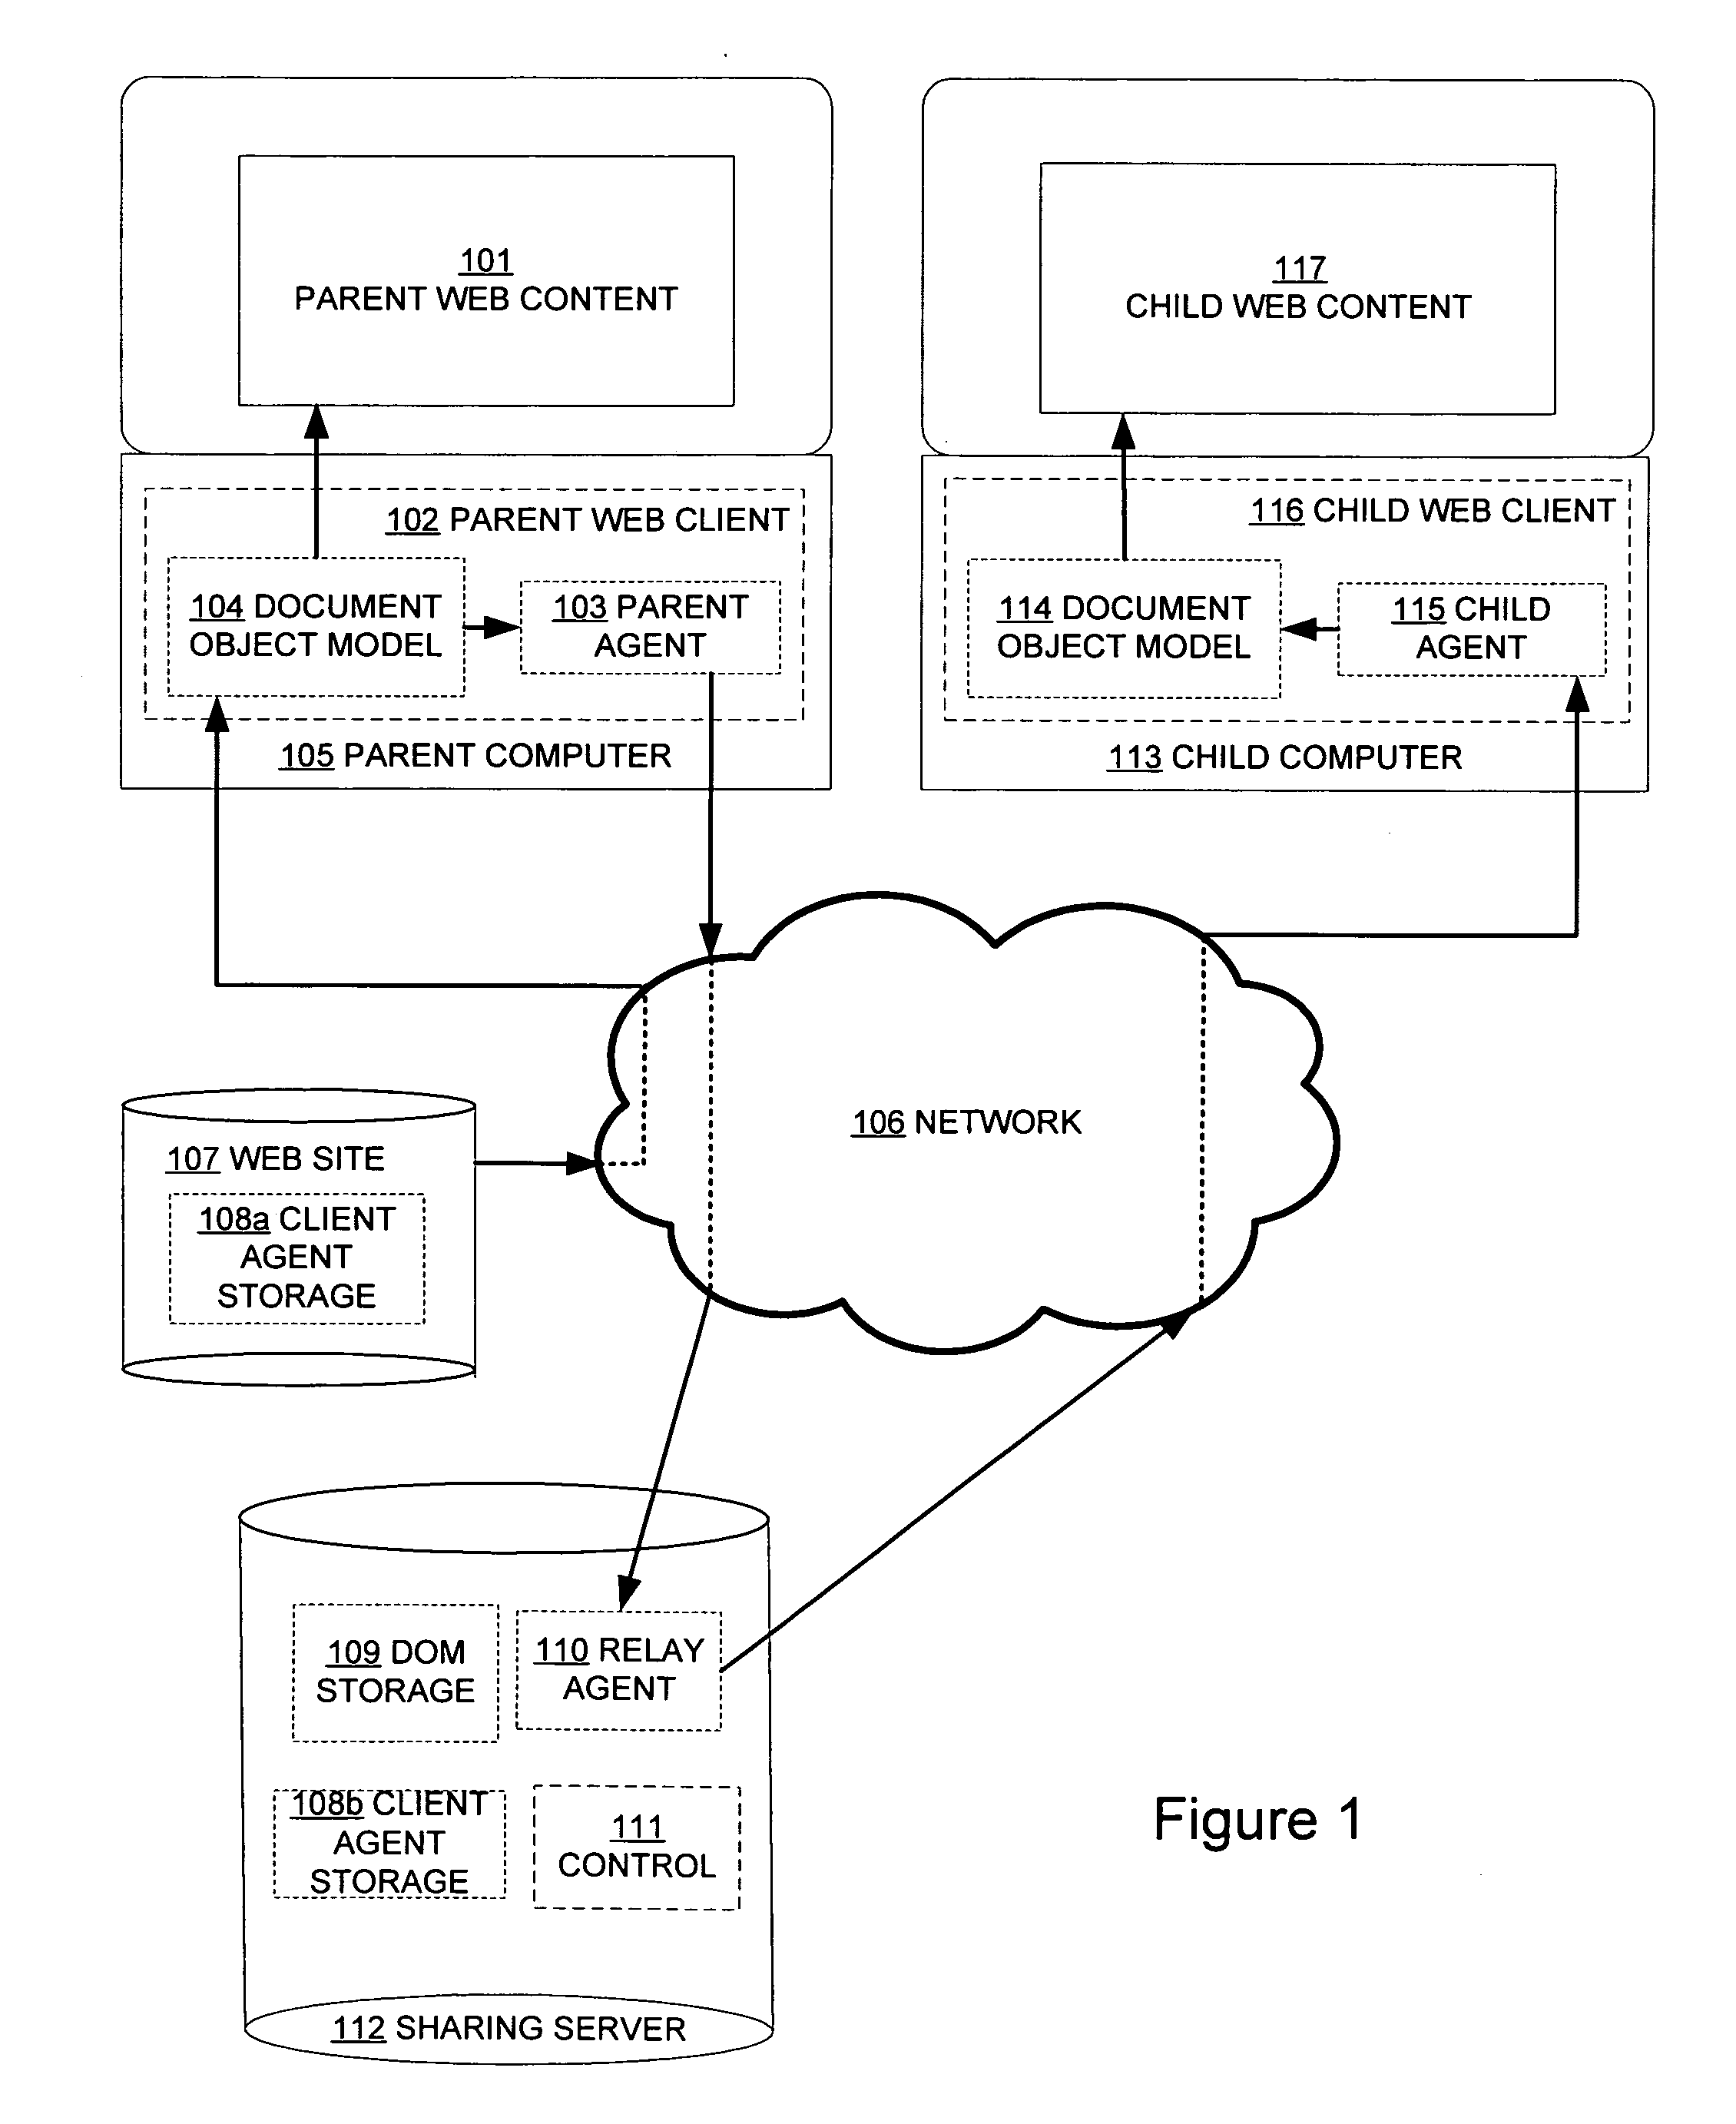 Method and system to share content between web clients